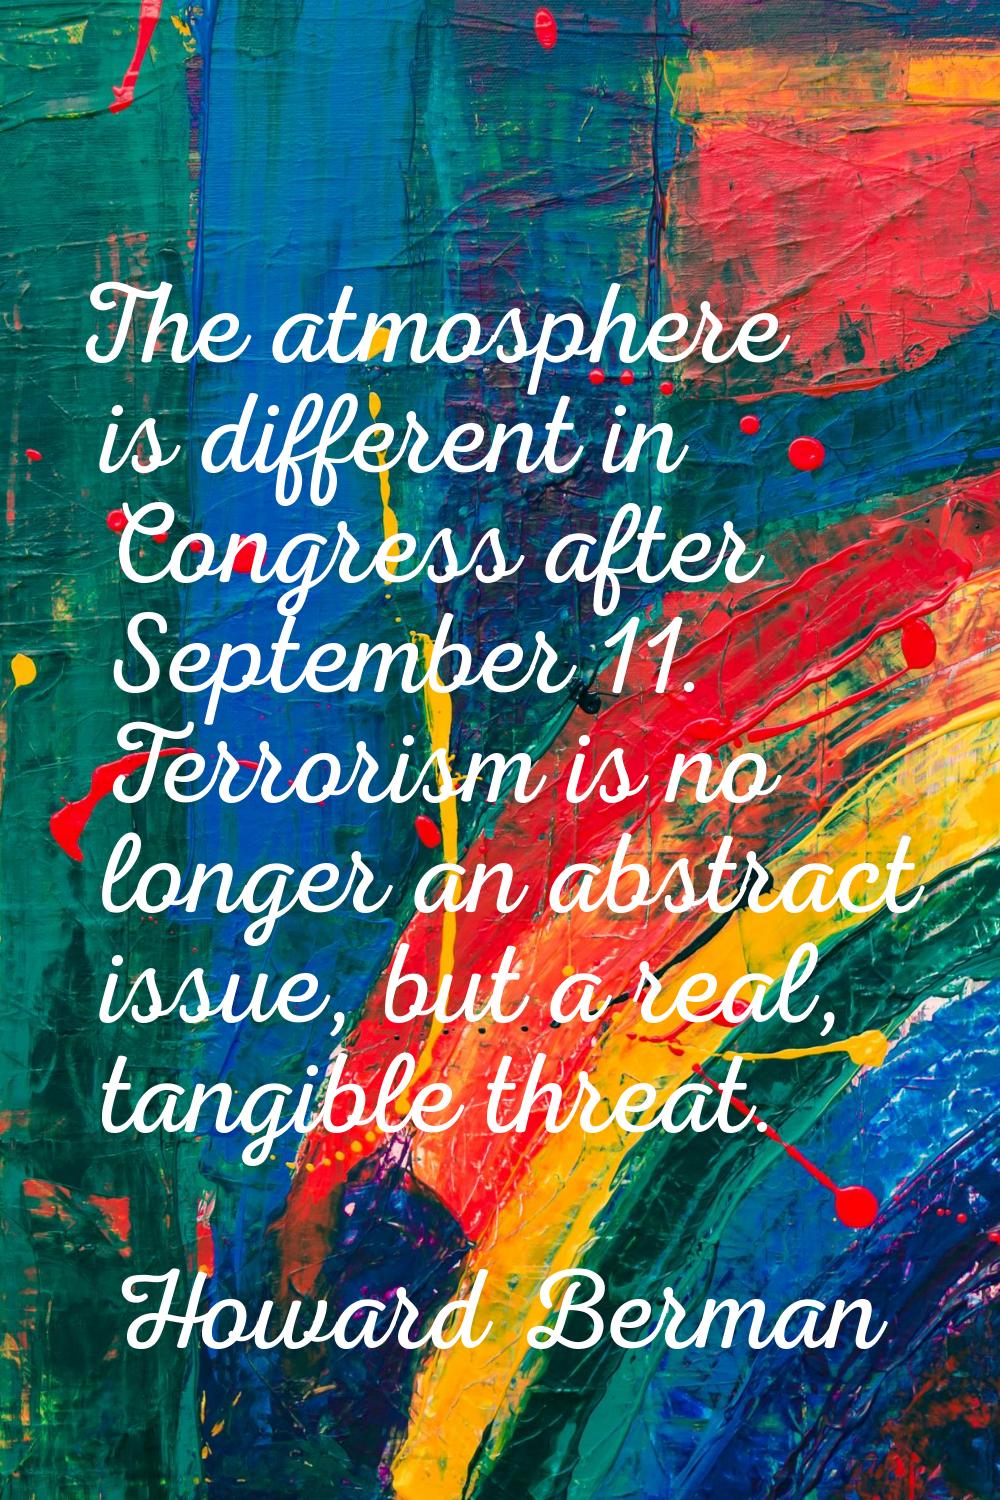 The atmosphere is different in Congress after September 11. Terrorism is no longer an abstract issu